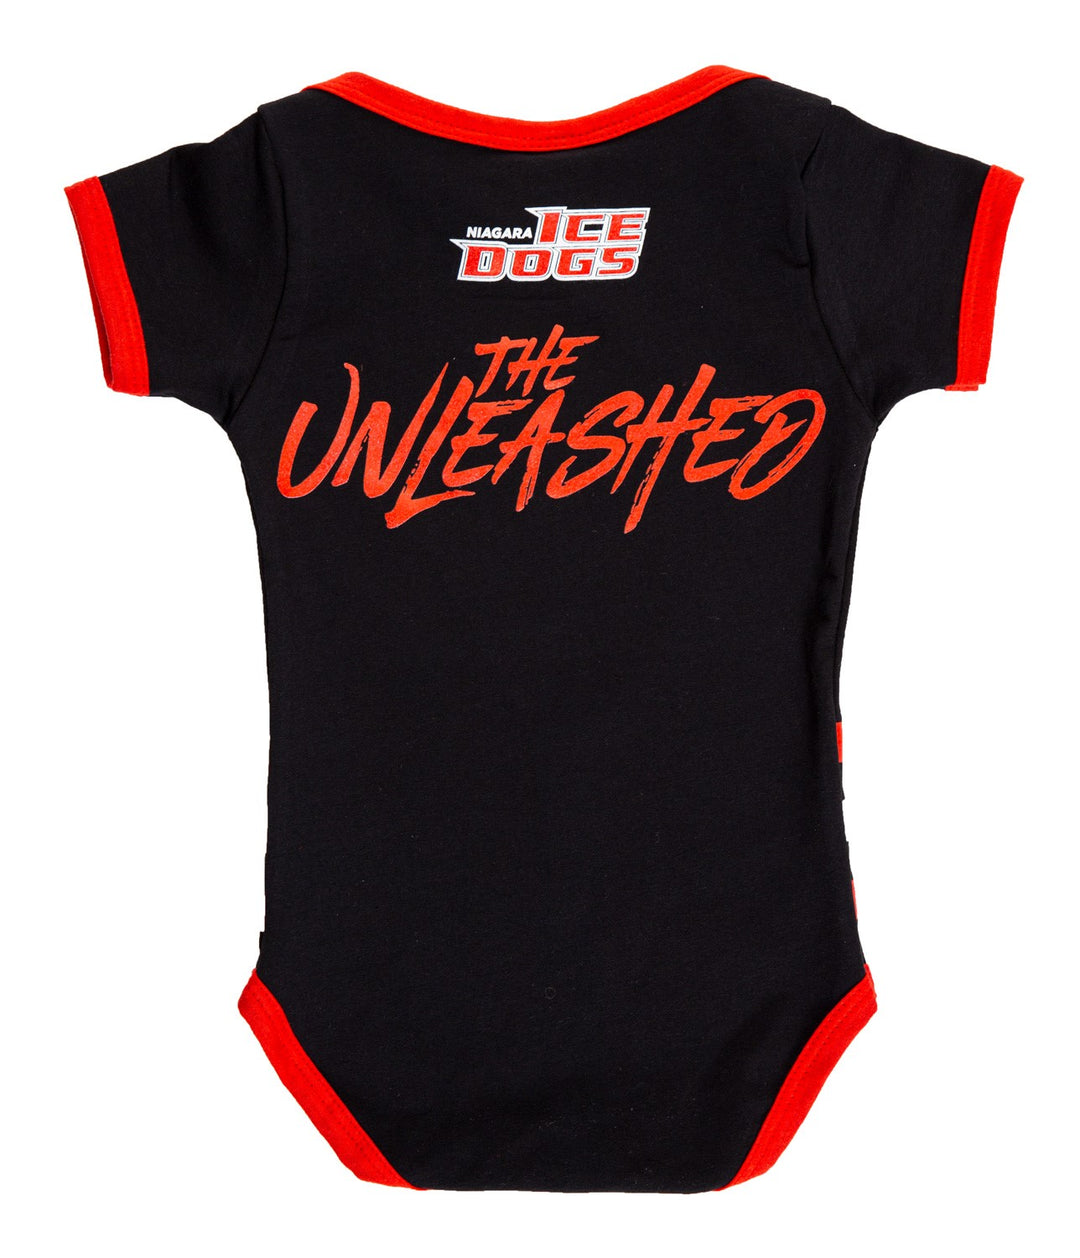 Niagara IceDogs Baby Onesie, The Unleashed, Back View.